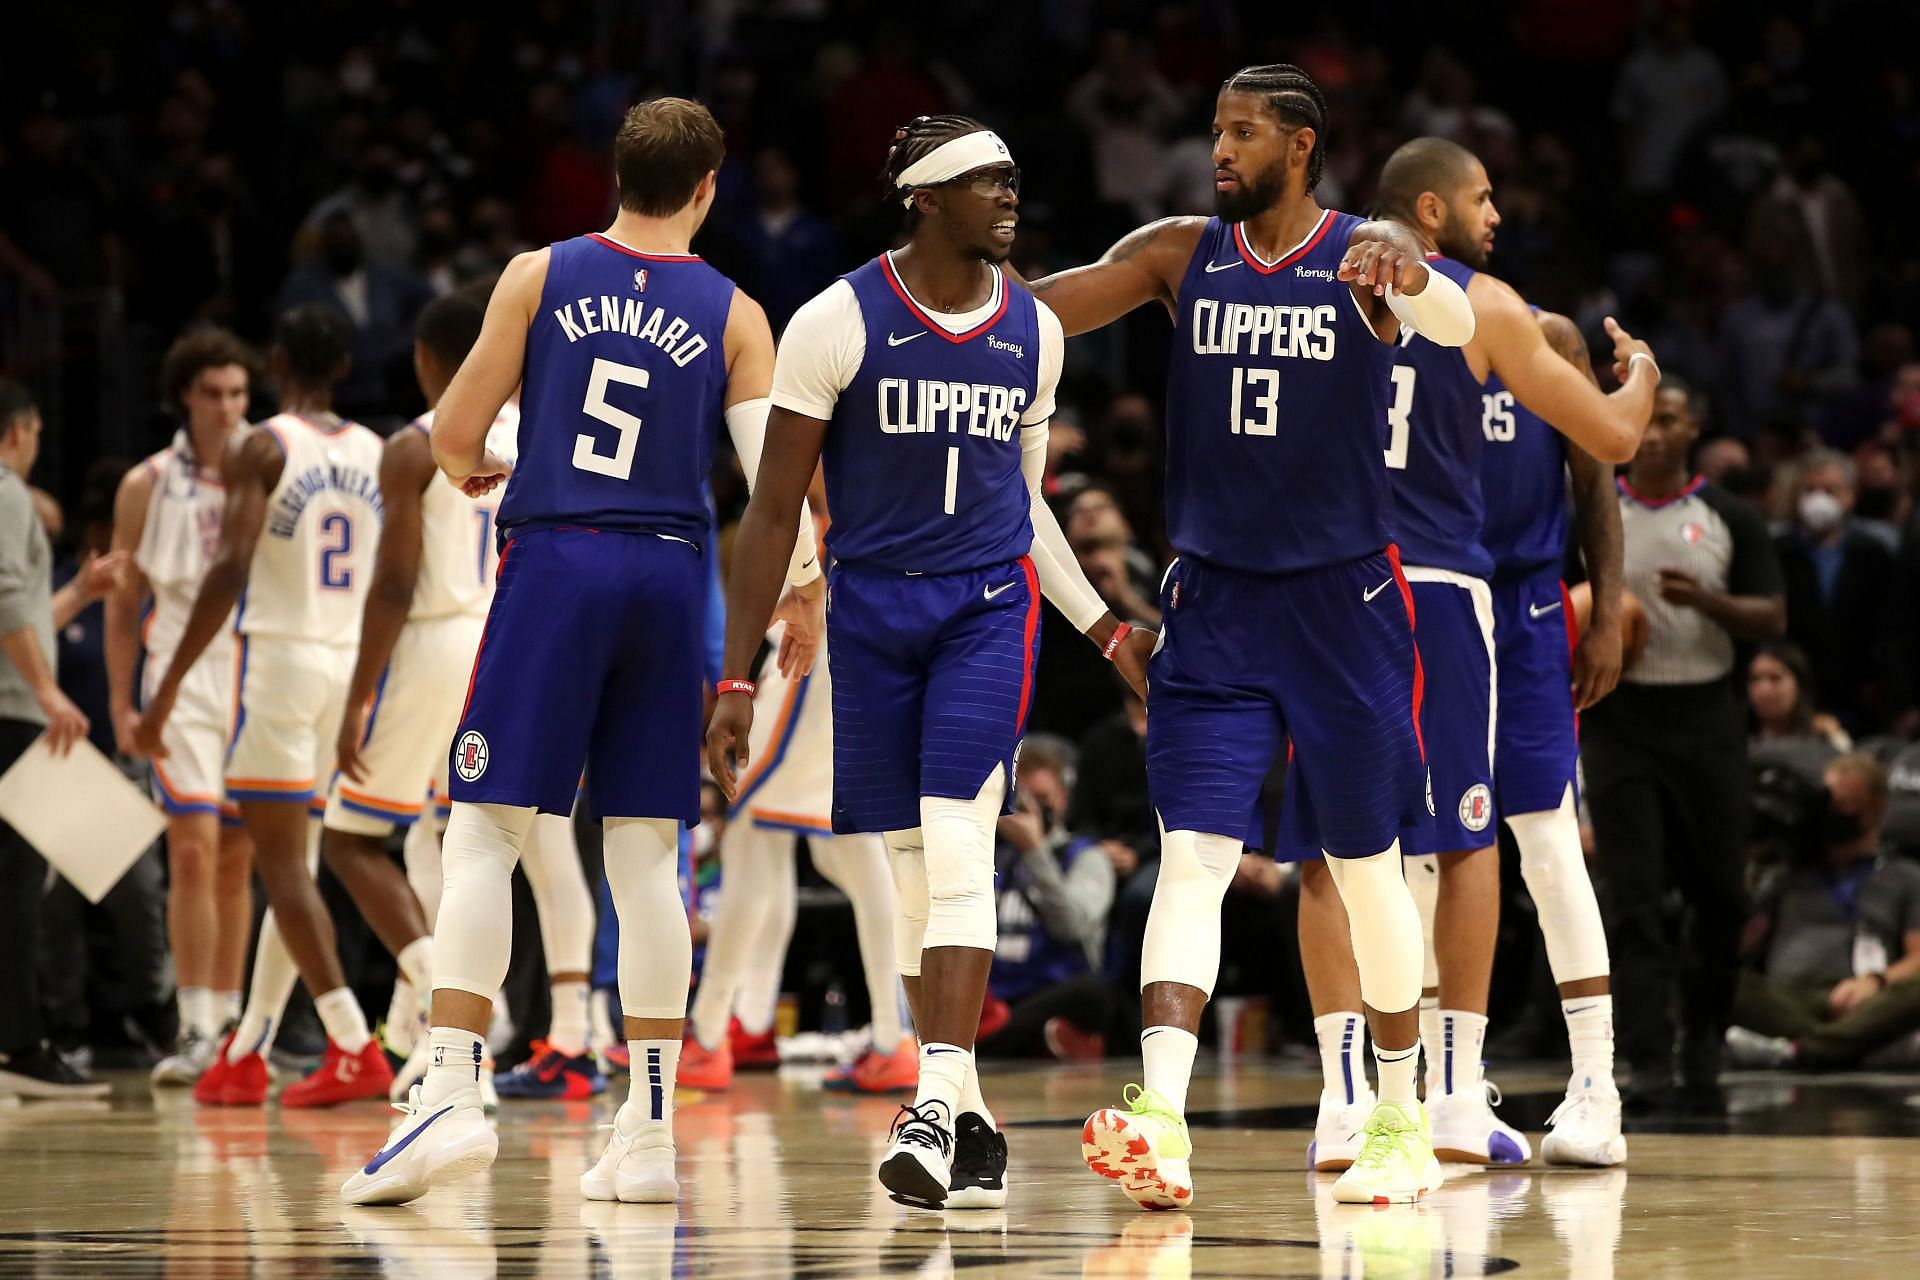 The LA Clippers are currently 9th in the Western Conference with a 4-4 record.